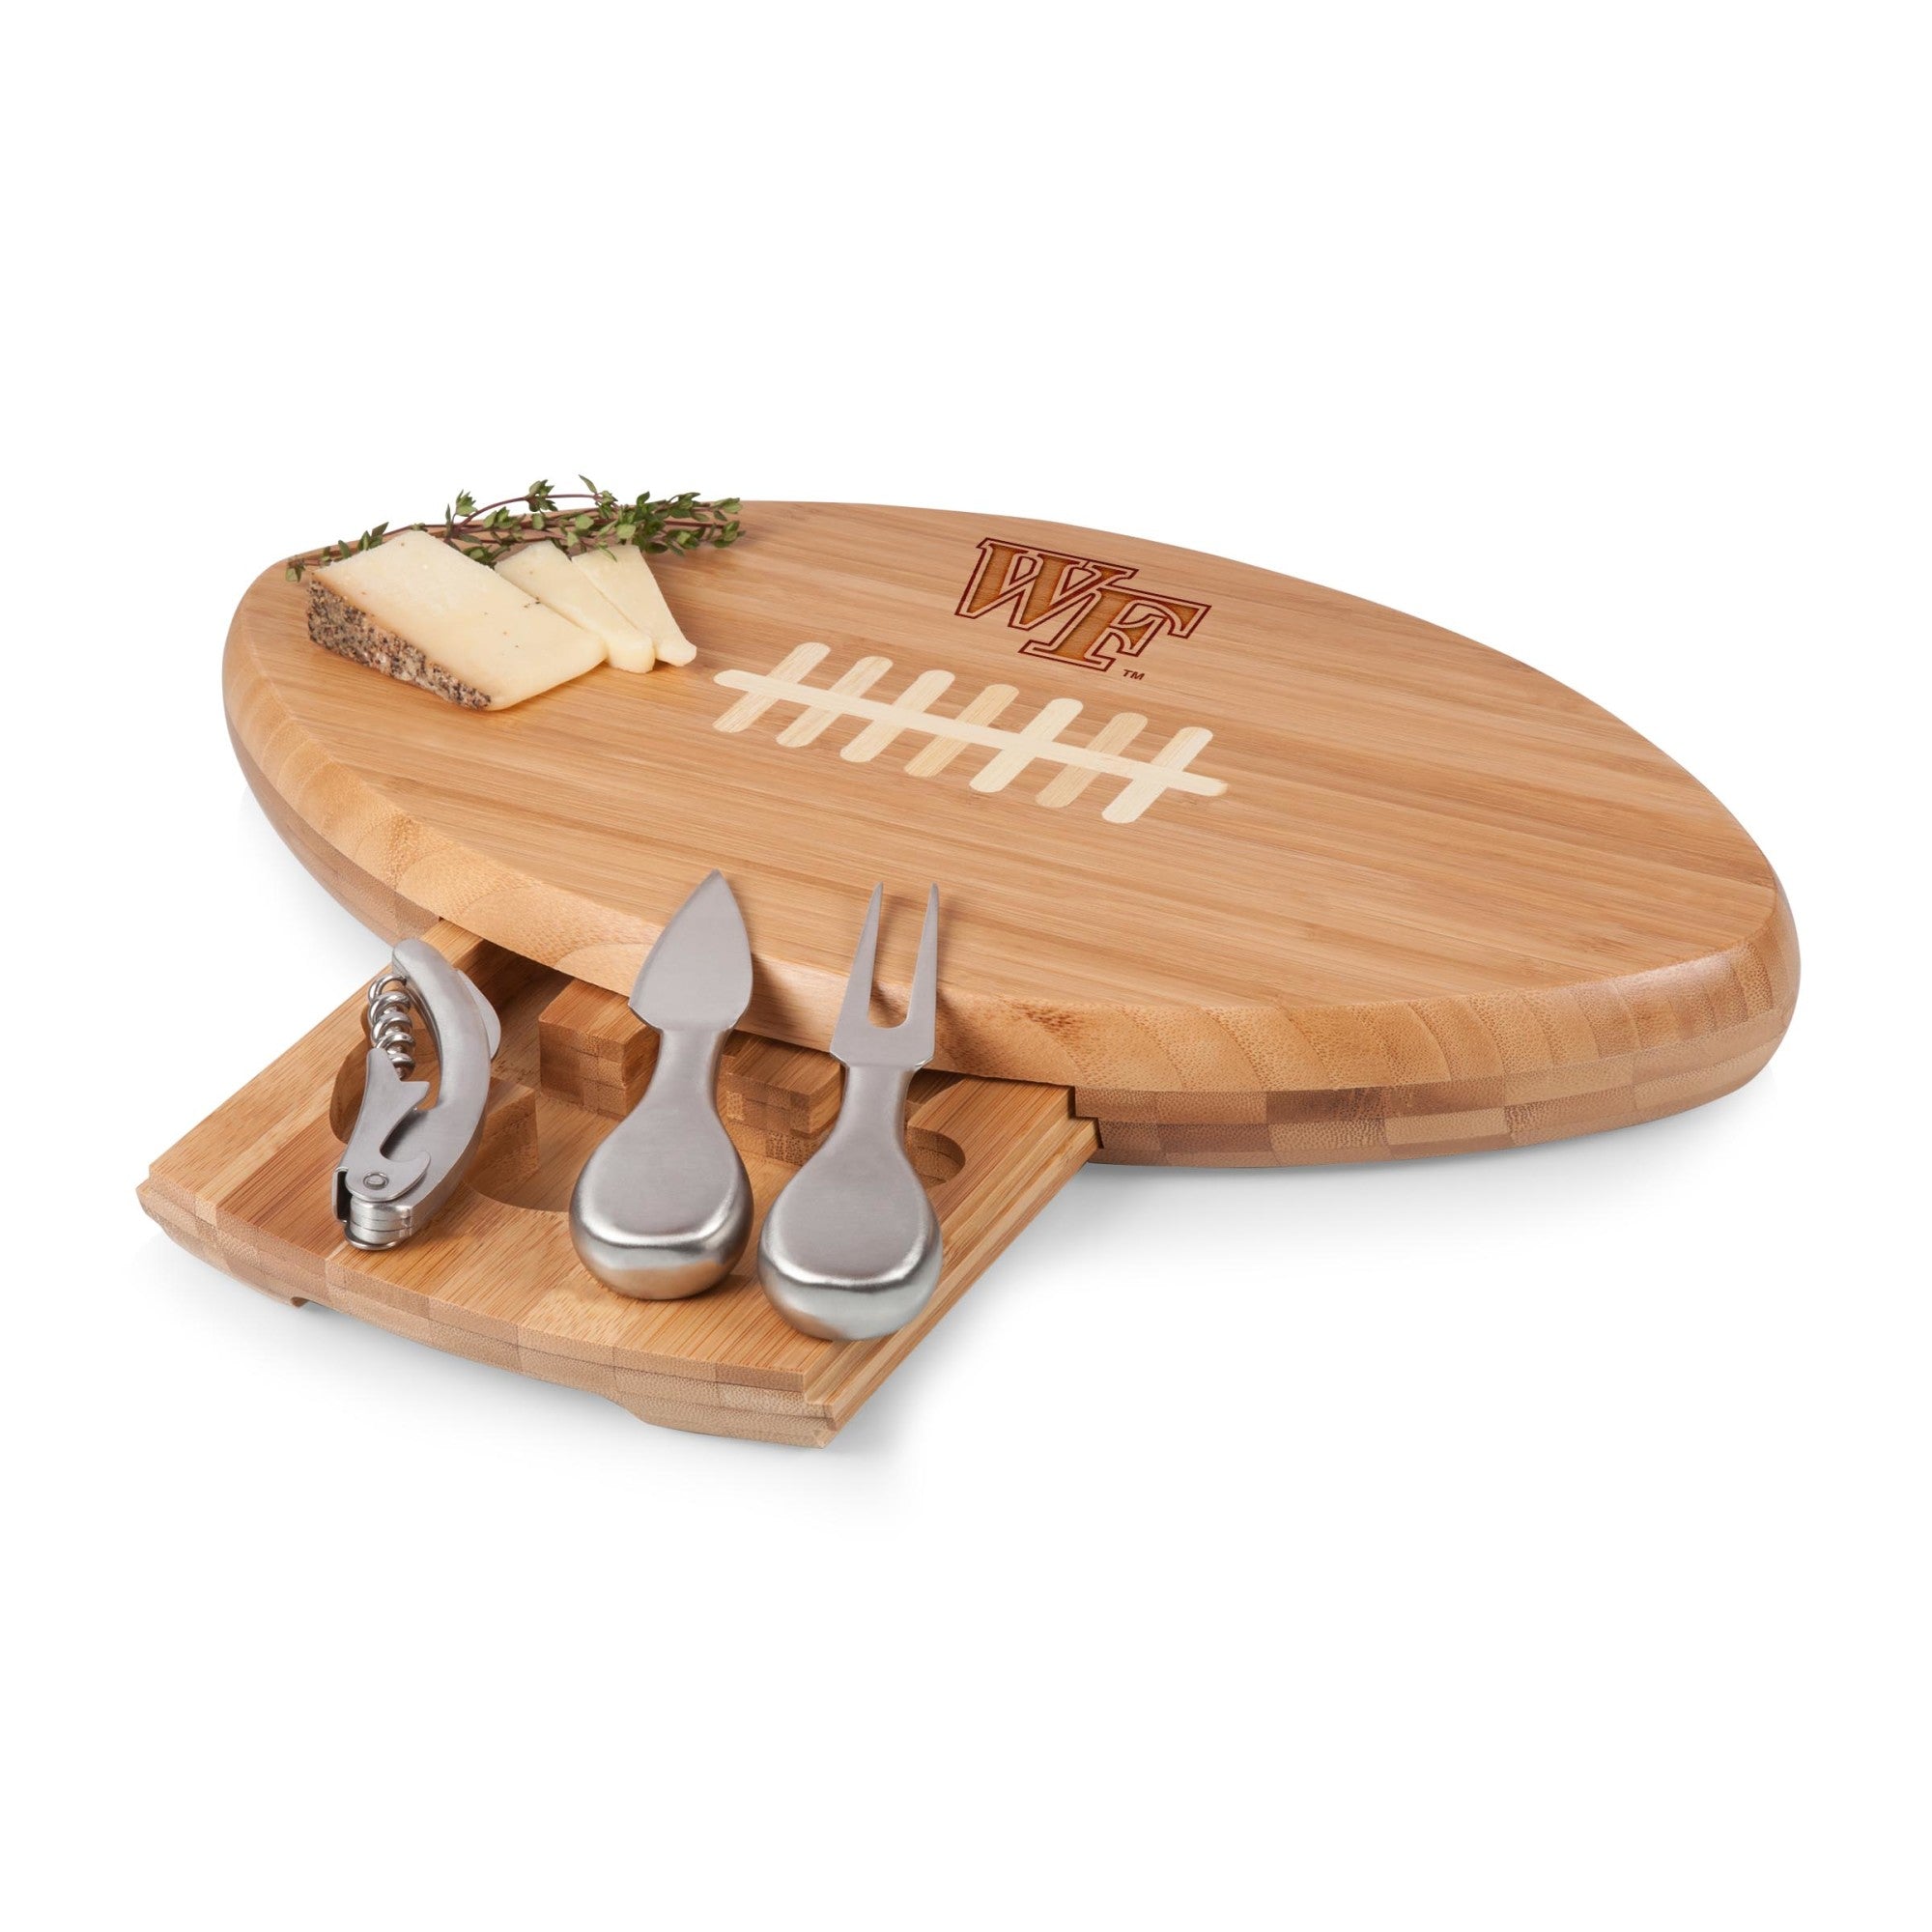 Wake Forest Demon Deacons - Quarterback Football Cheese Cutting Board & Tools Set, (Bamboo)